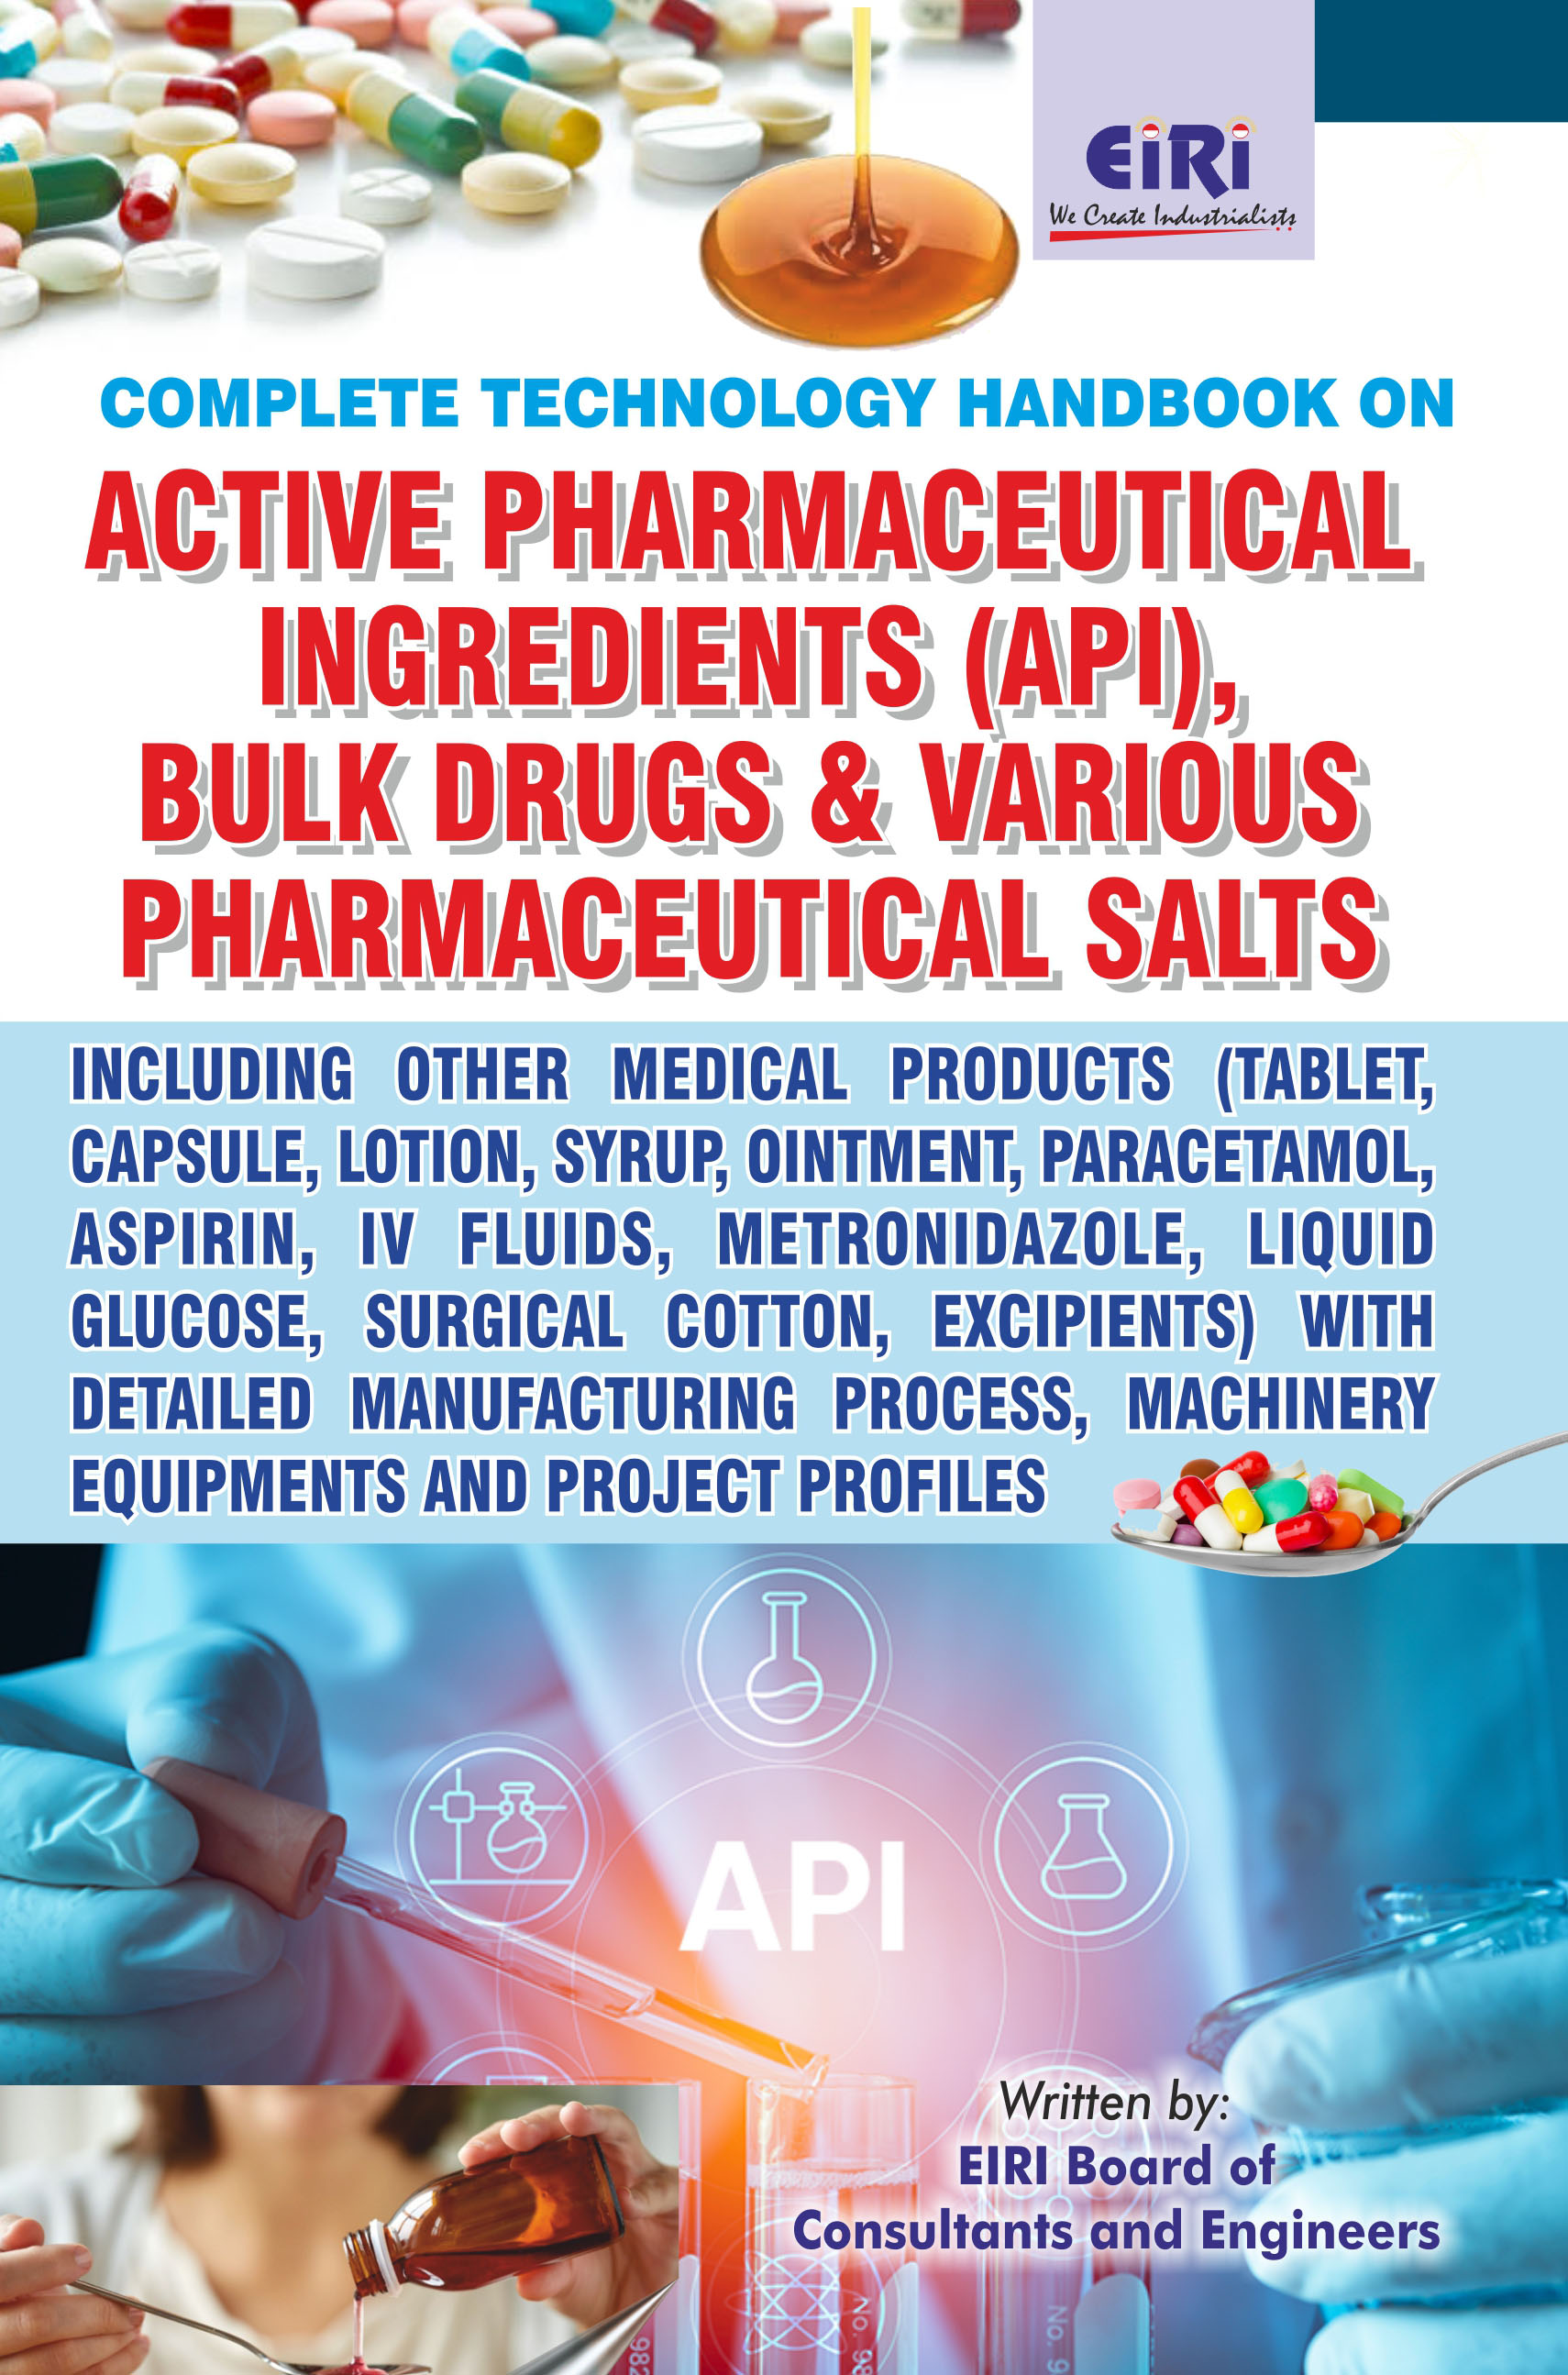 Complete Technology Handbook on Active Pharmaceutical Ingredients, Bulk Drugs & Pharmaceutical Salts including Medical Products (Aspirin, Metronidazole, Liquid Glucose, Excipients) with Manufacturing Process, Machinery Equipments and Project Profiles